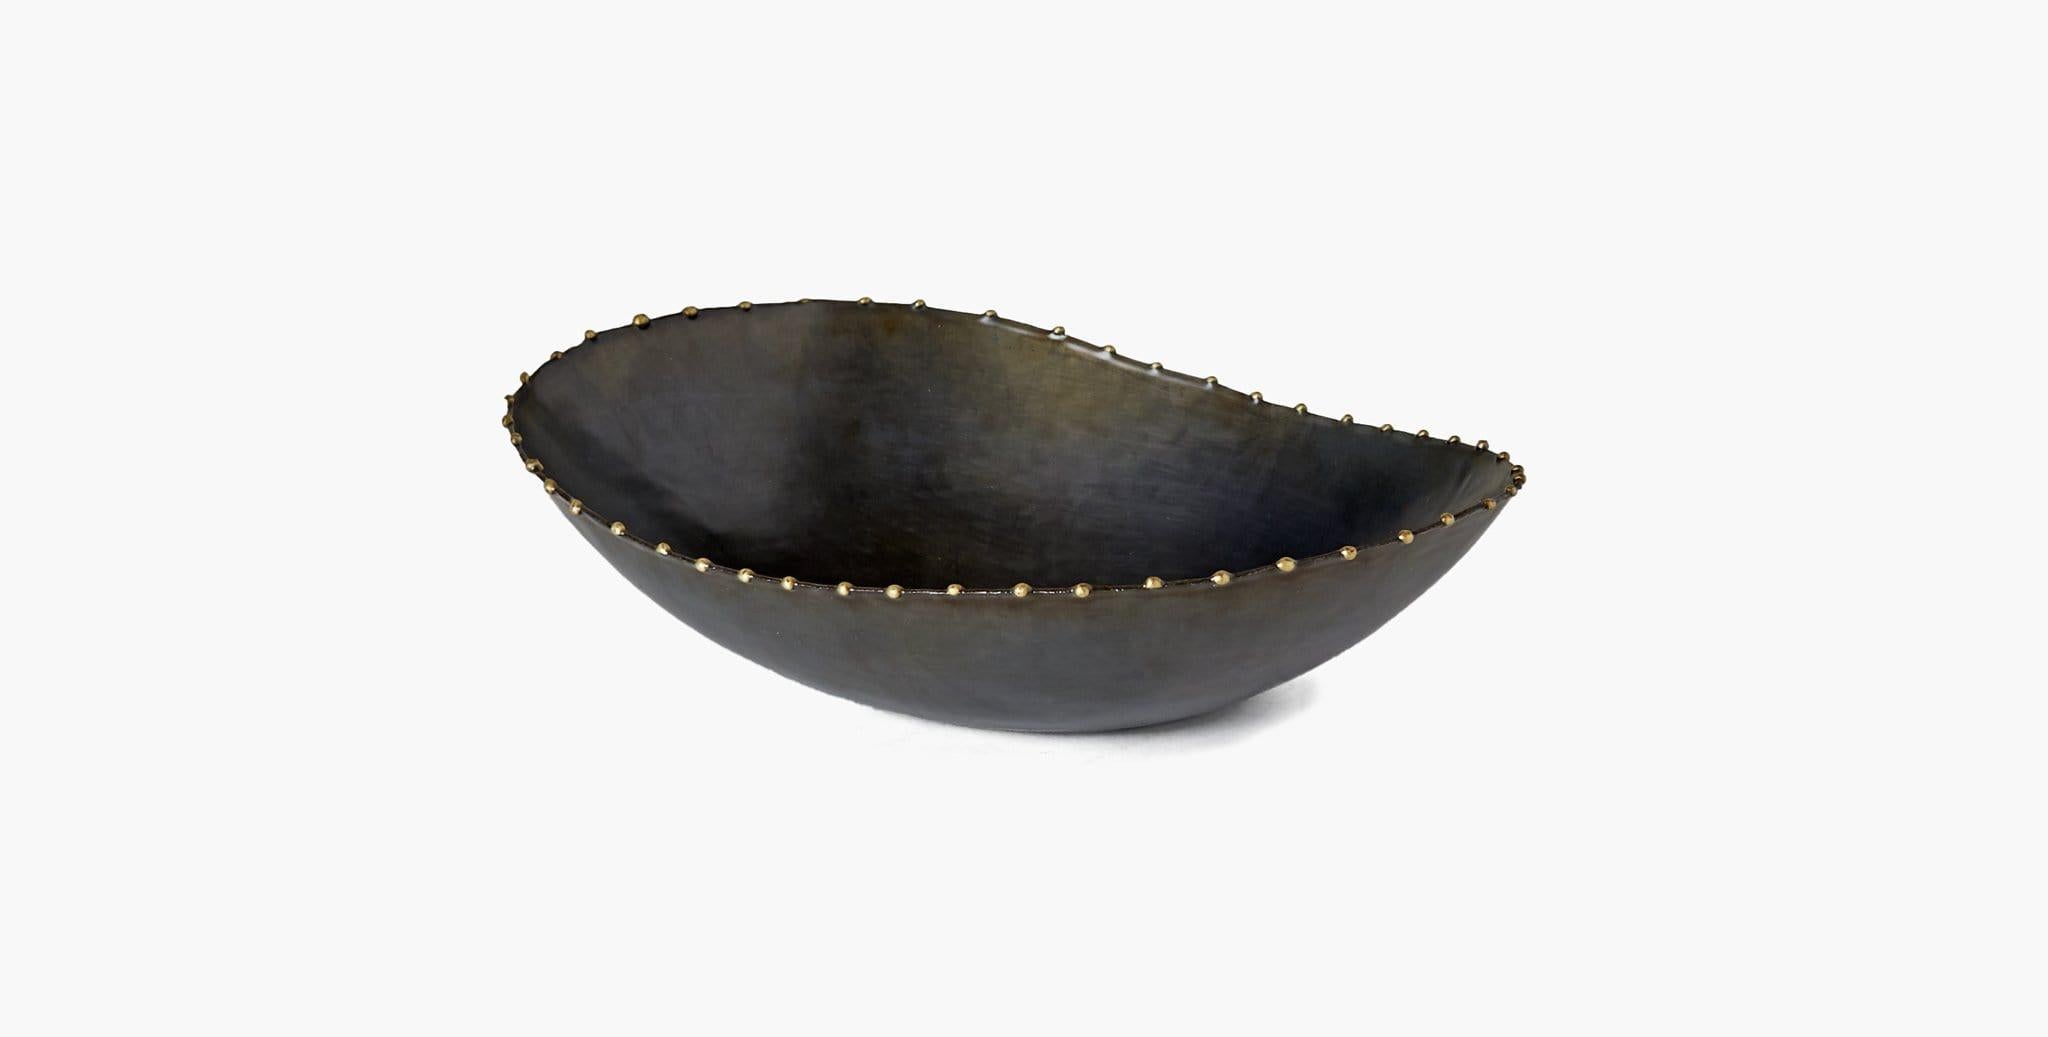 Our Montana Bowls effortlessly elevate your home décor, featuring organic curves in ebonized iron with subtle metal detailing to highlight its serpentine edge. Our handcrafted finishes are inspired by variations within natural textures. Each